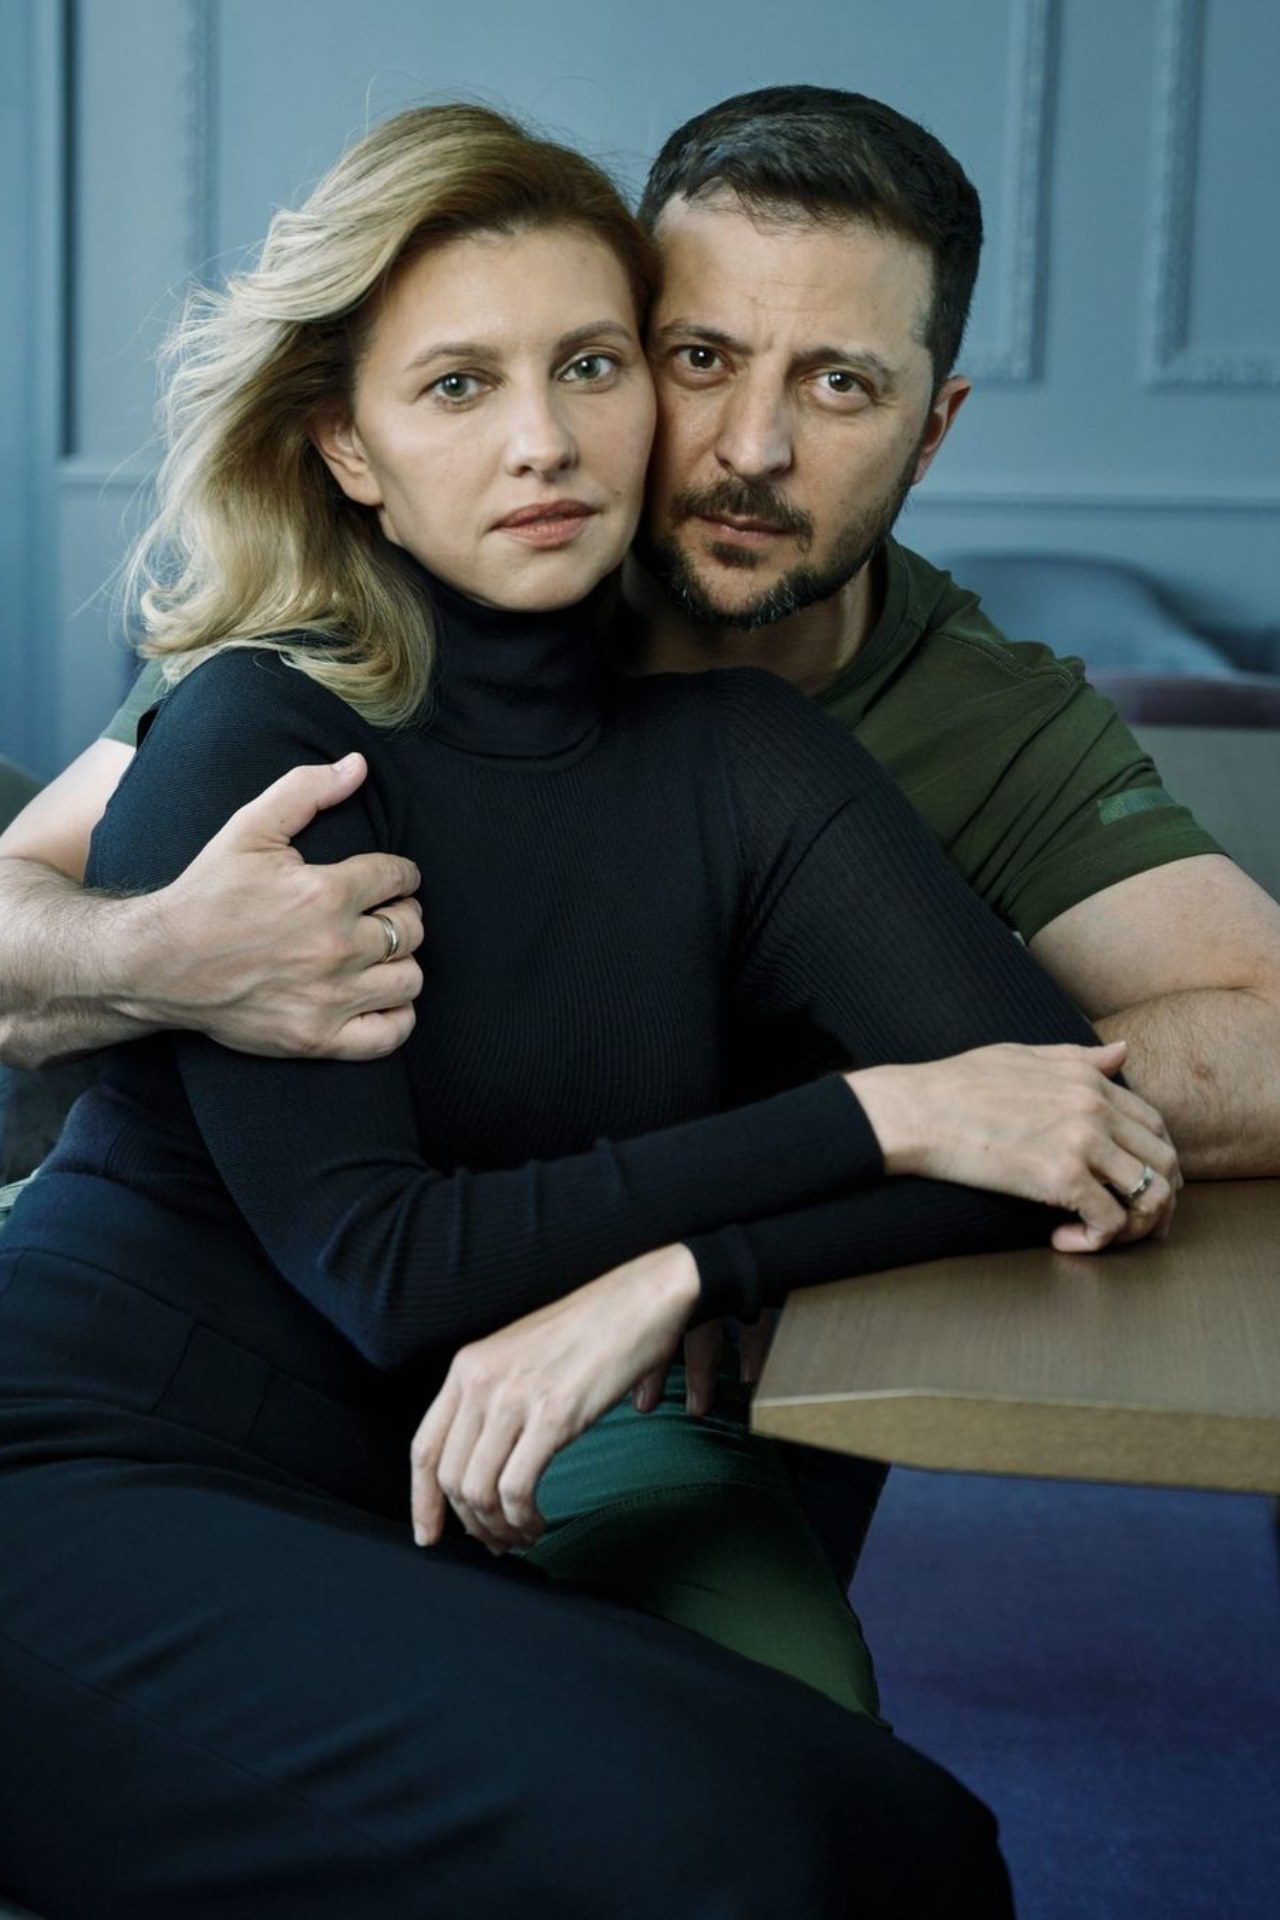 Volodymyr Zelenskyy and Olena Zelenska are grabbing eyeballs after getting featured on the Vogue cover.